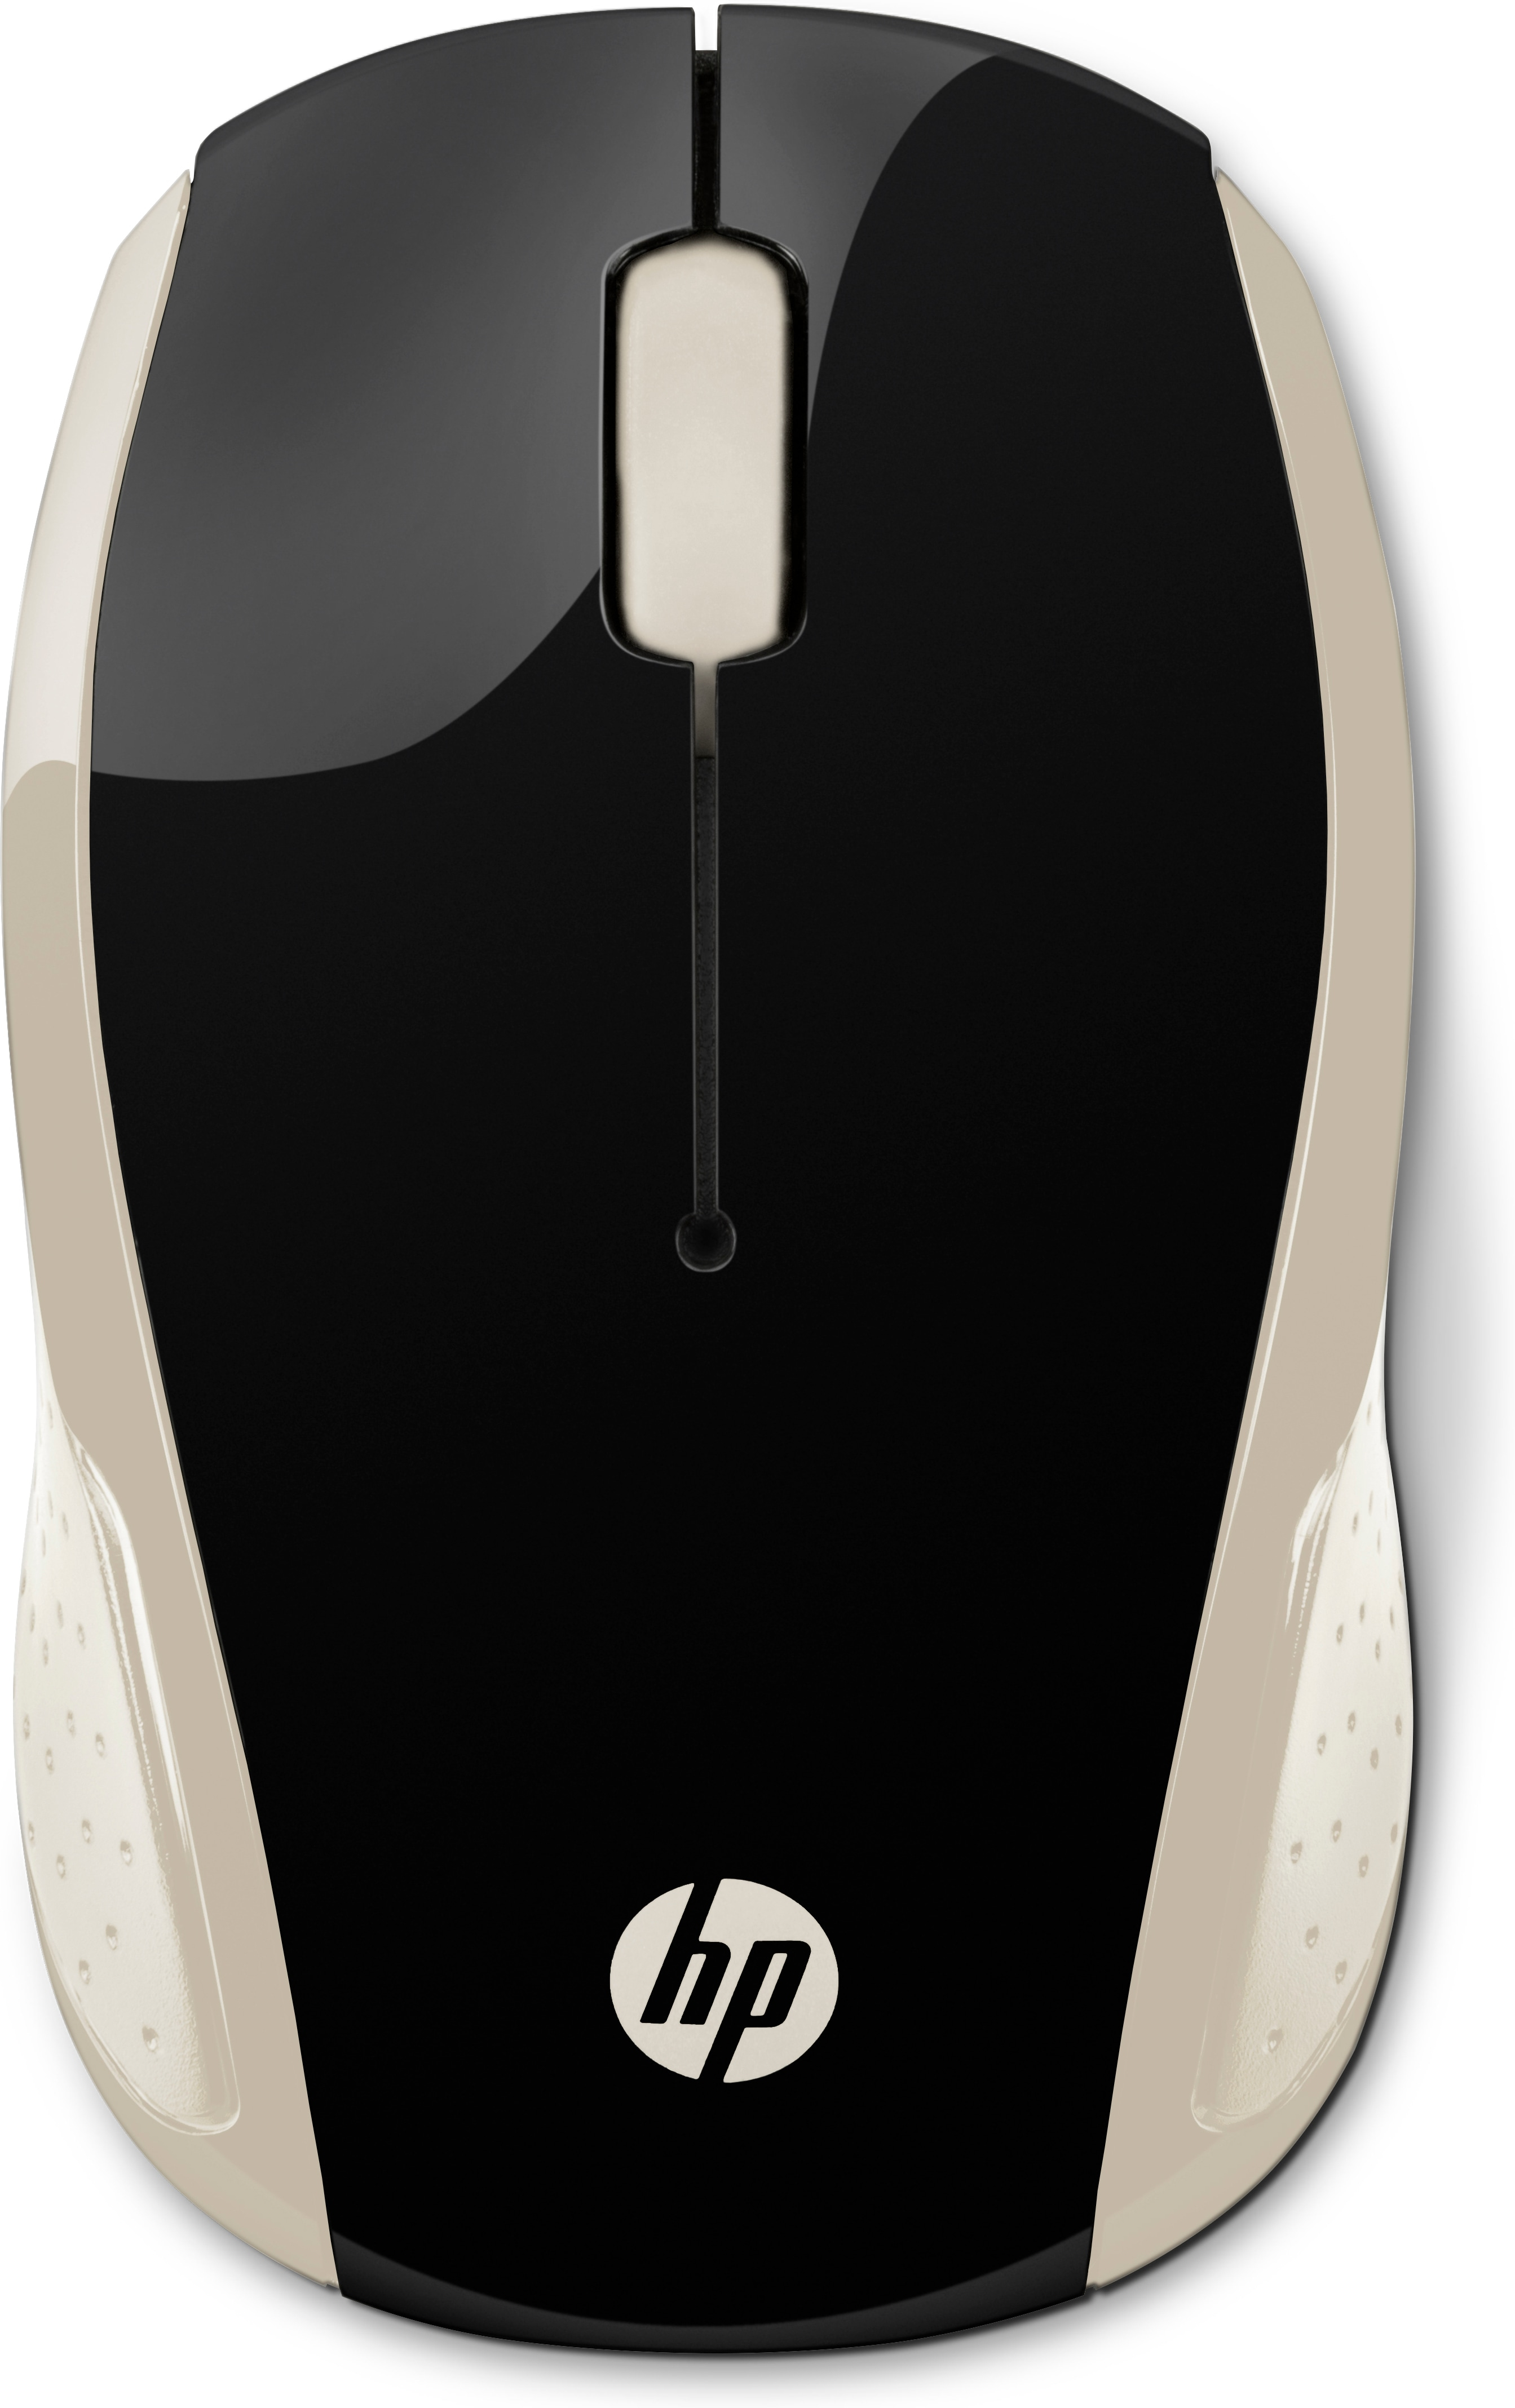 200 SILK GOLD WIRELESS MOUSE